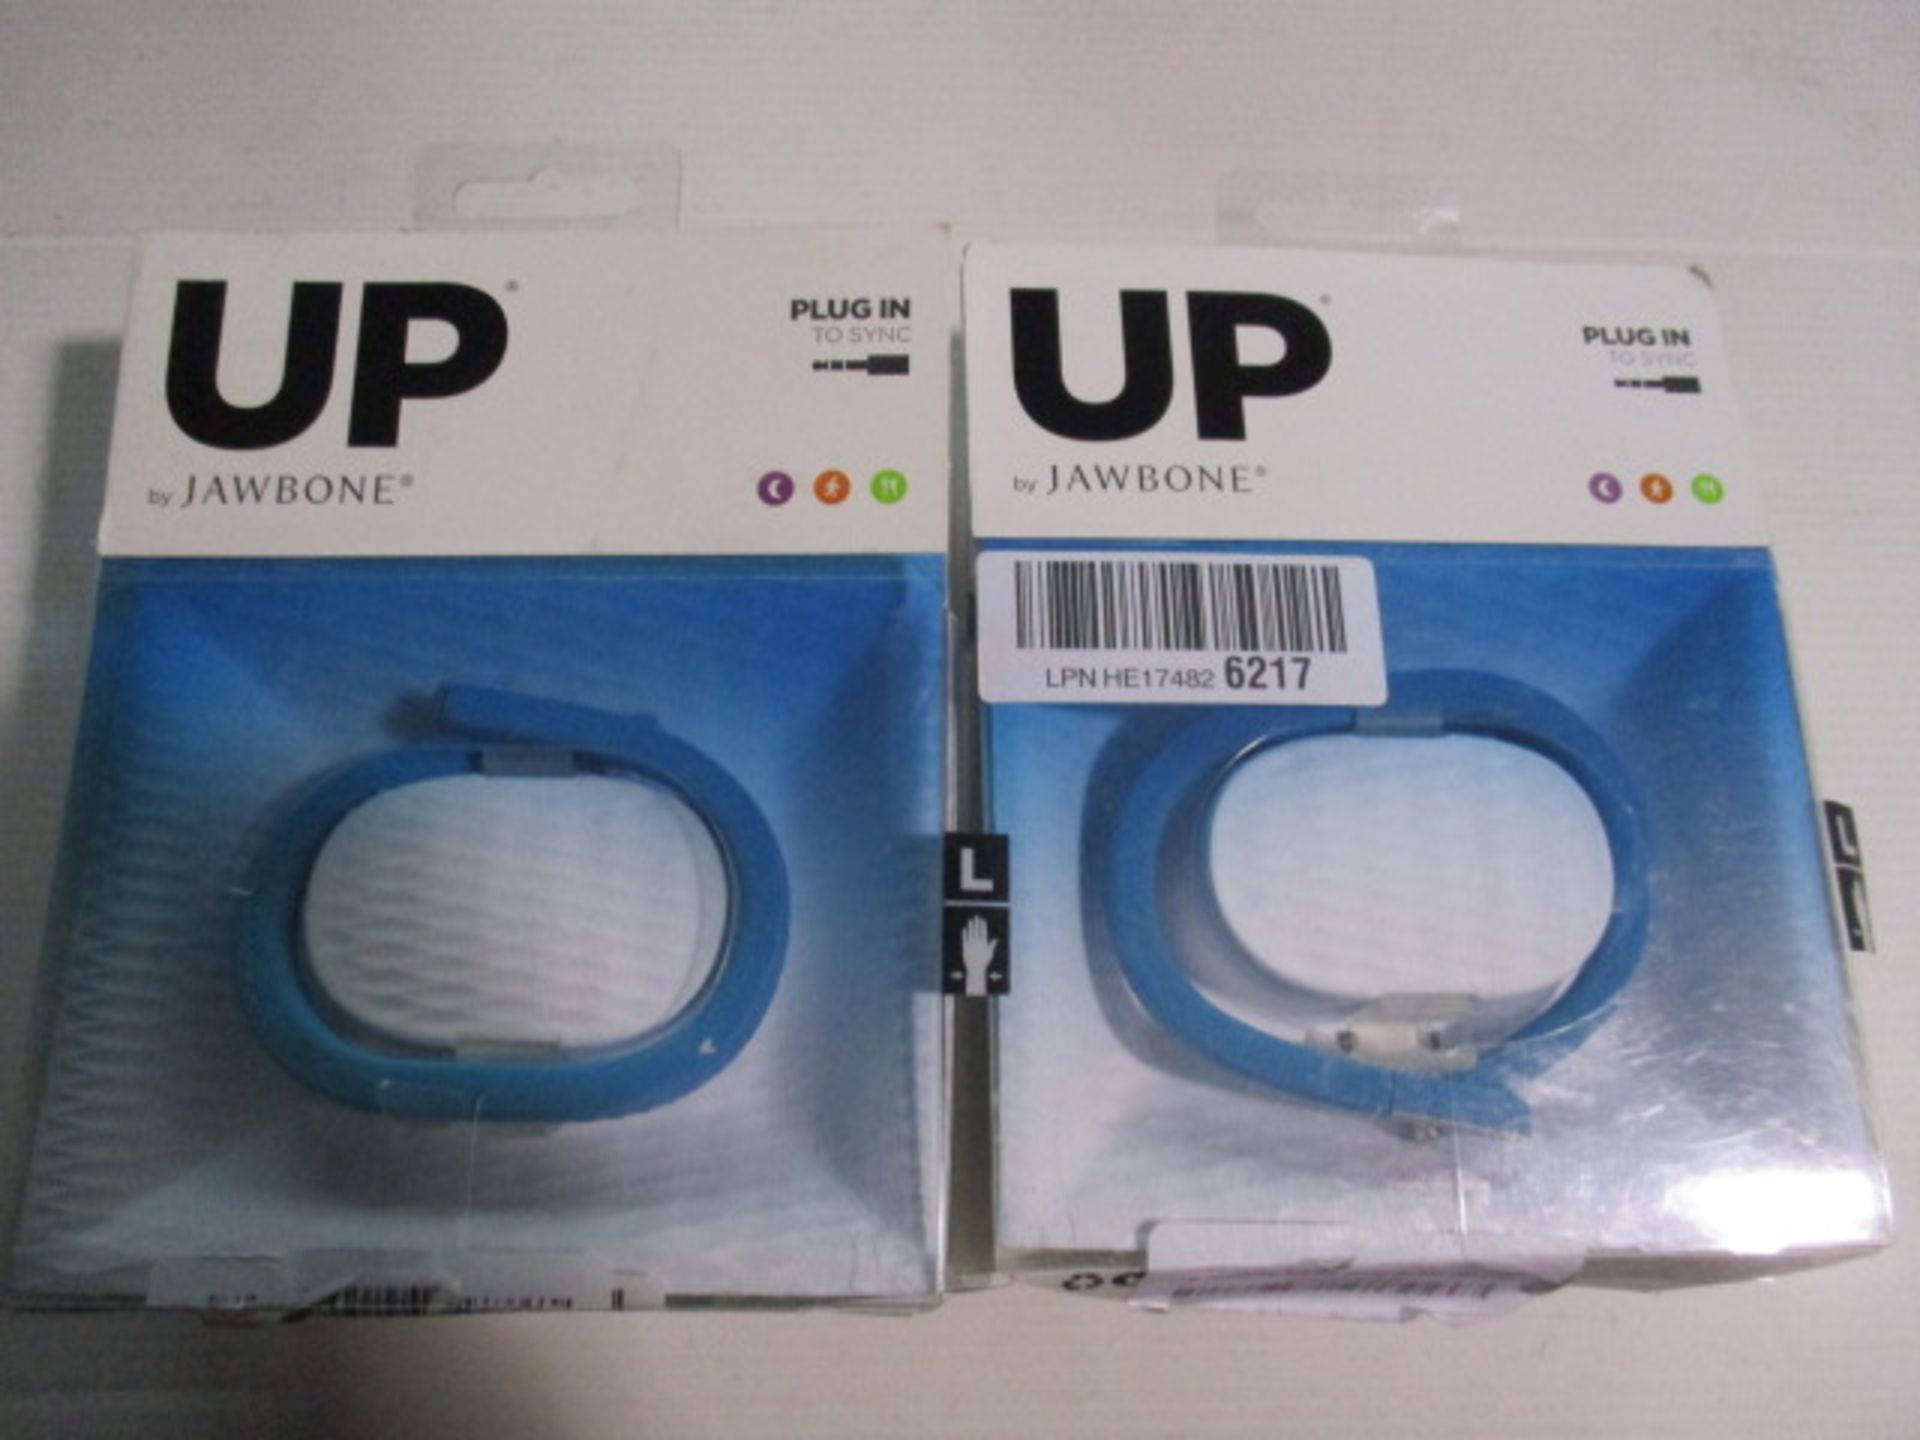 2 x UP by Jawbone systems as pictured boxed and unchecked